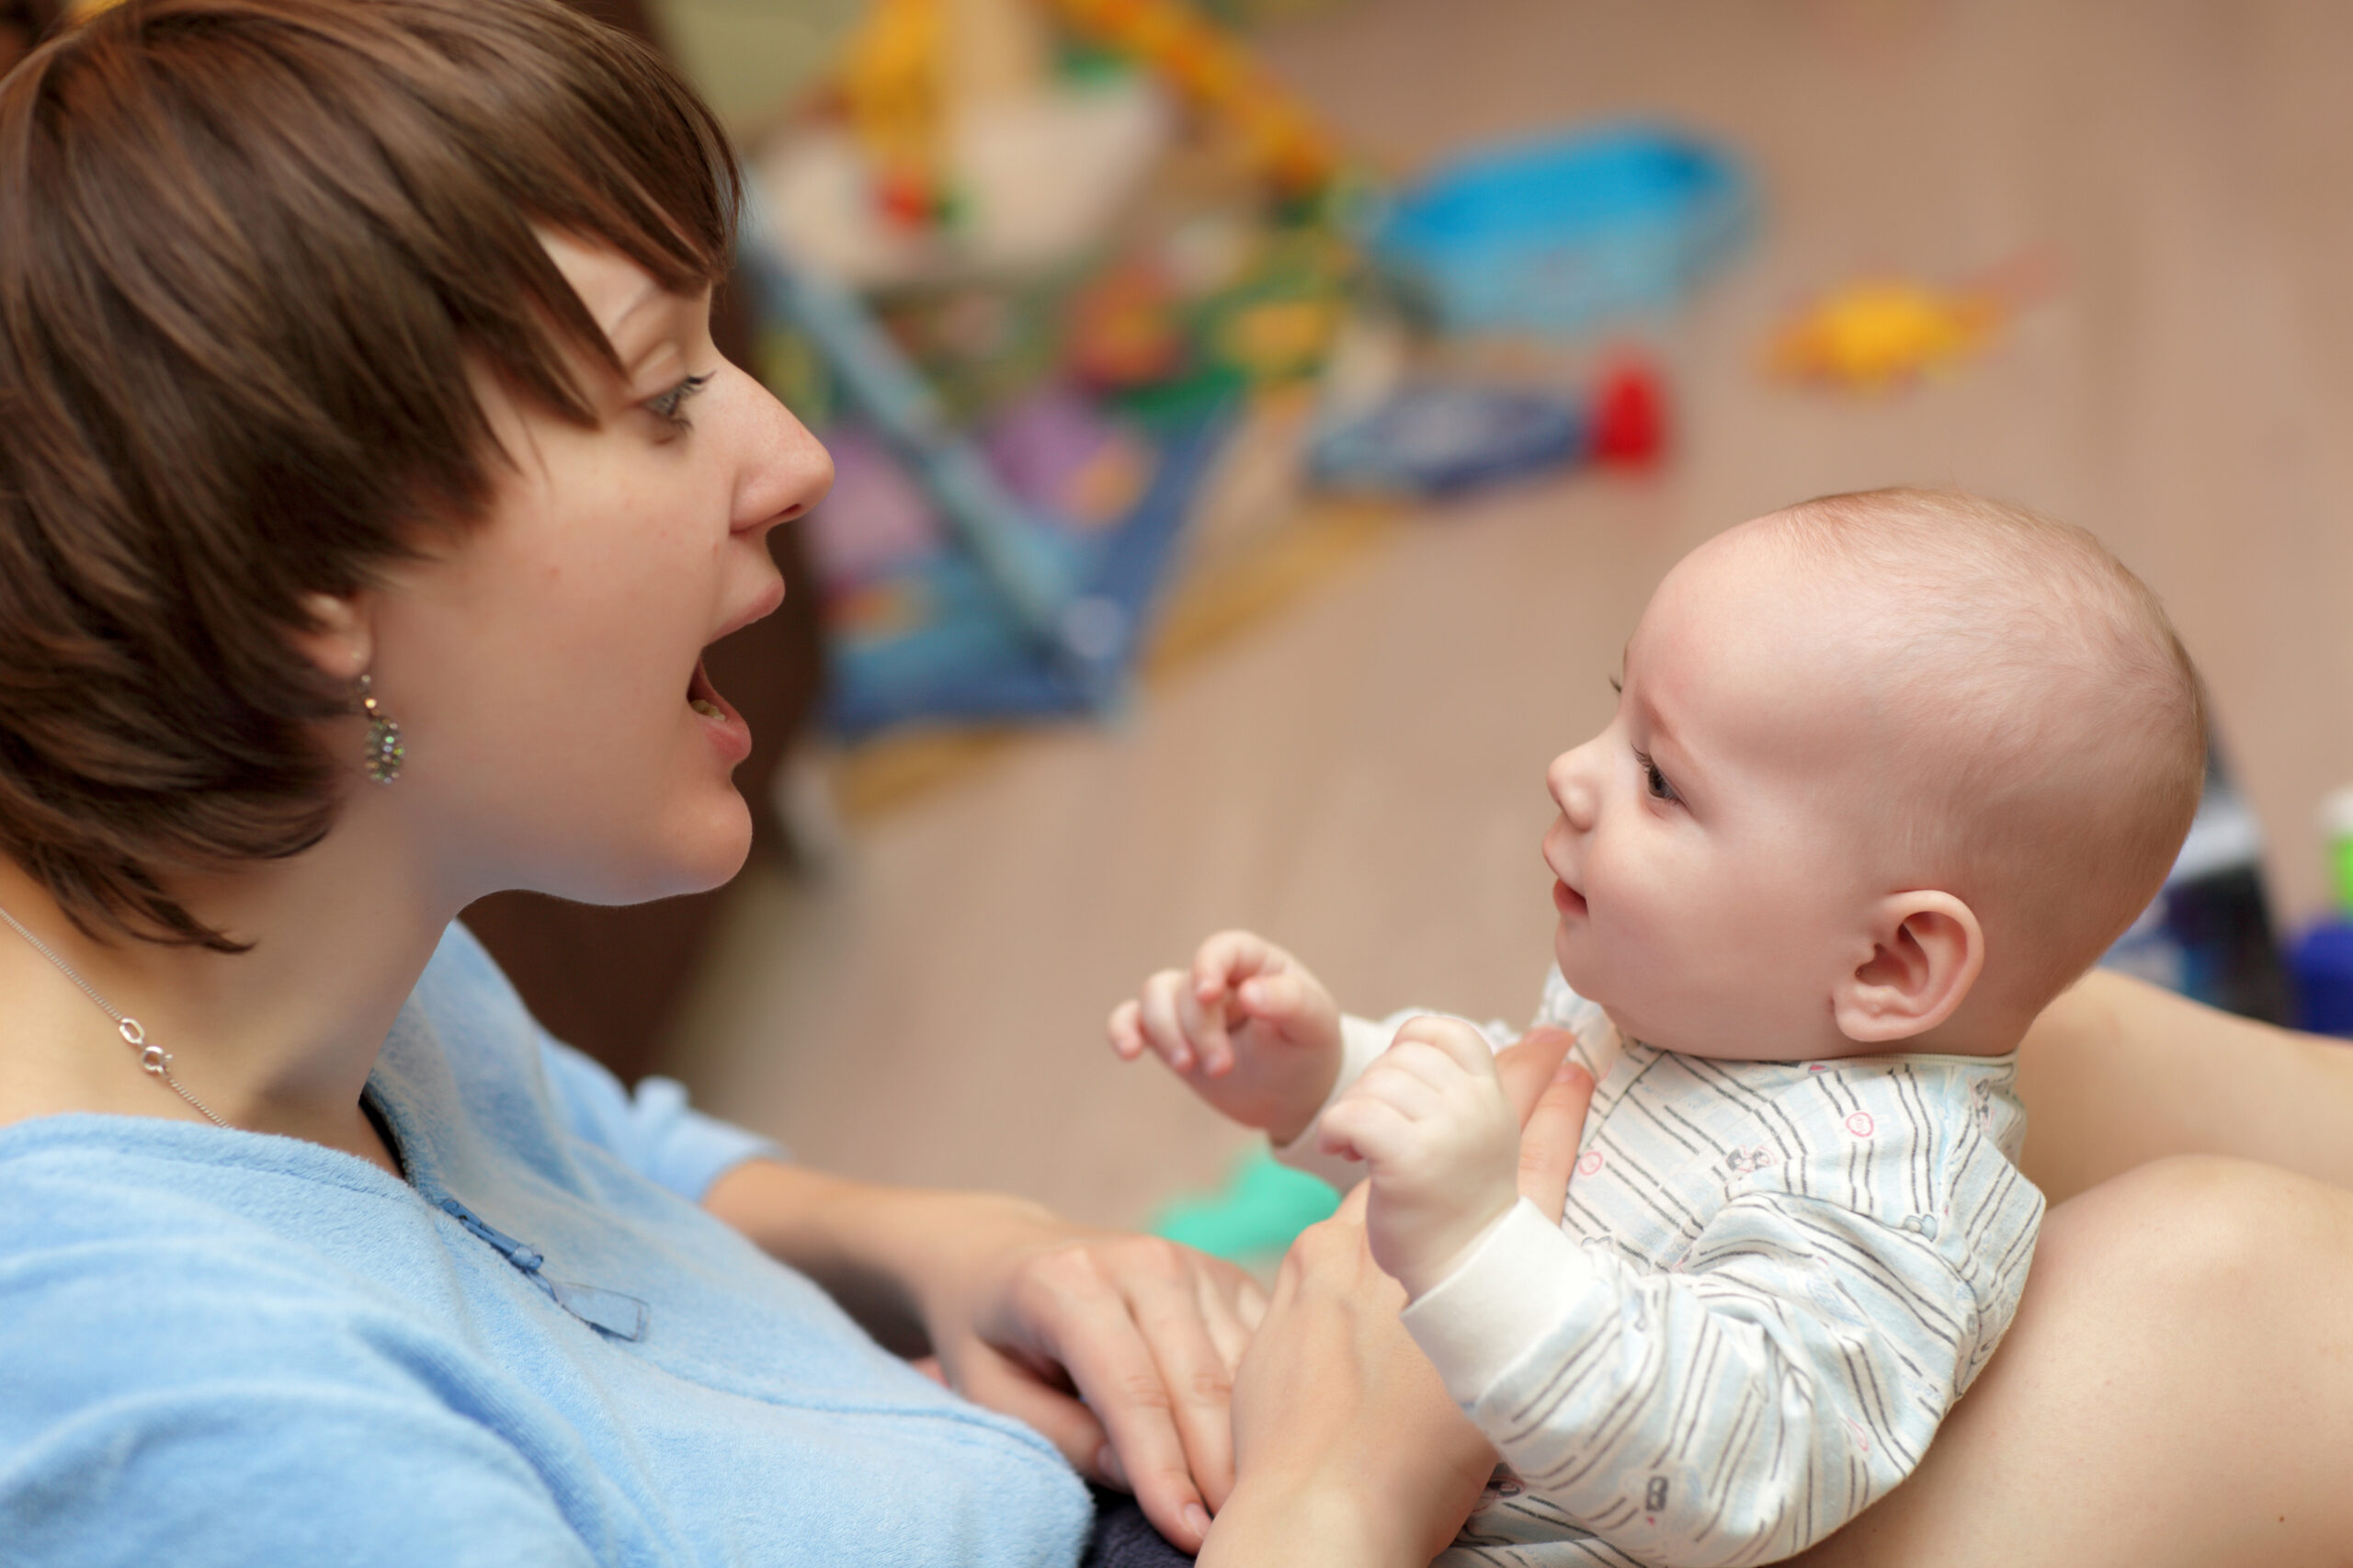 Featured image for “Babies, Toddlers, and Language”